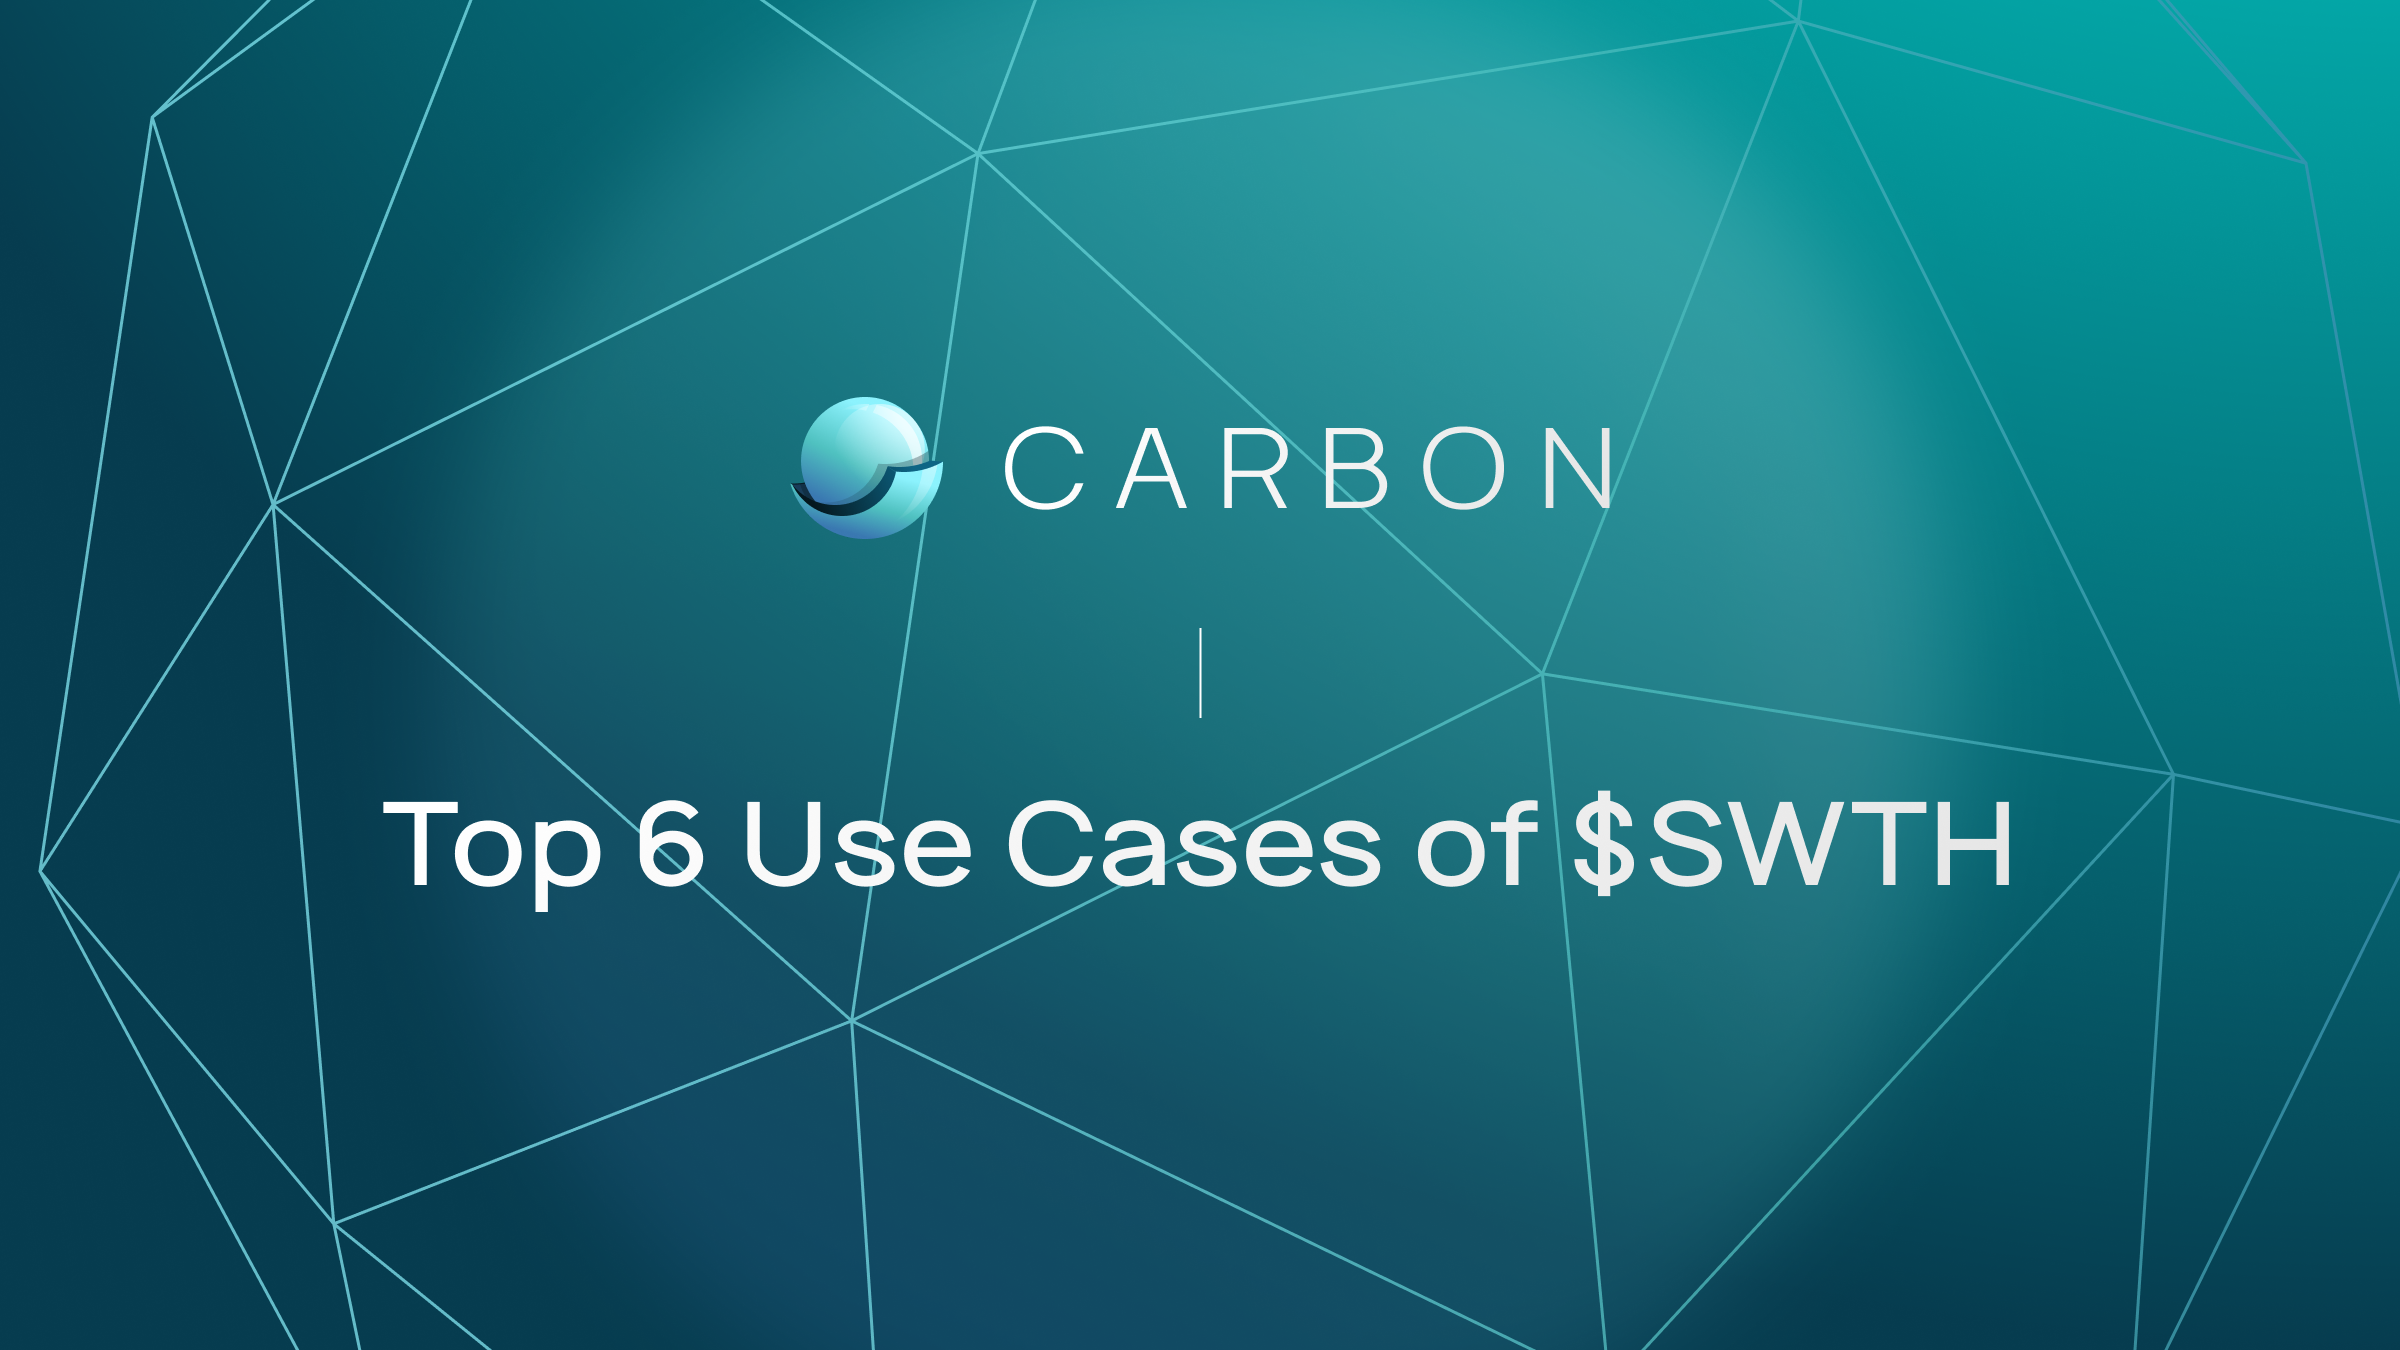 Top 6 use cases of $SWTH